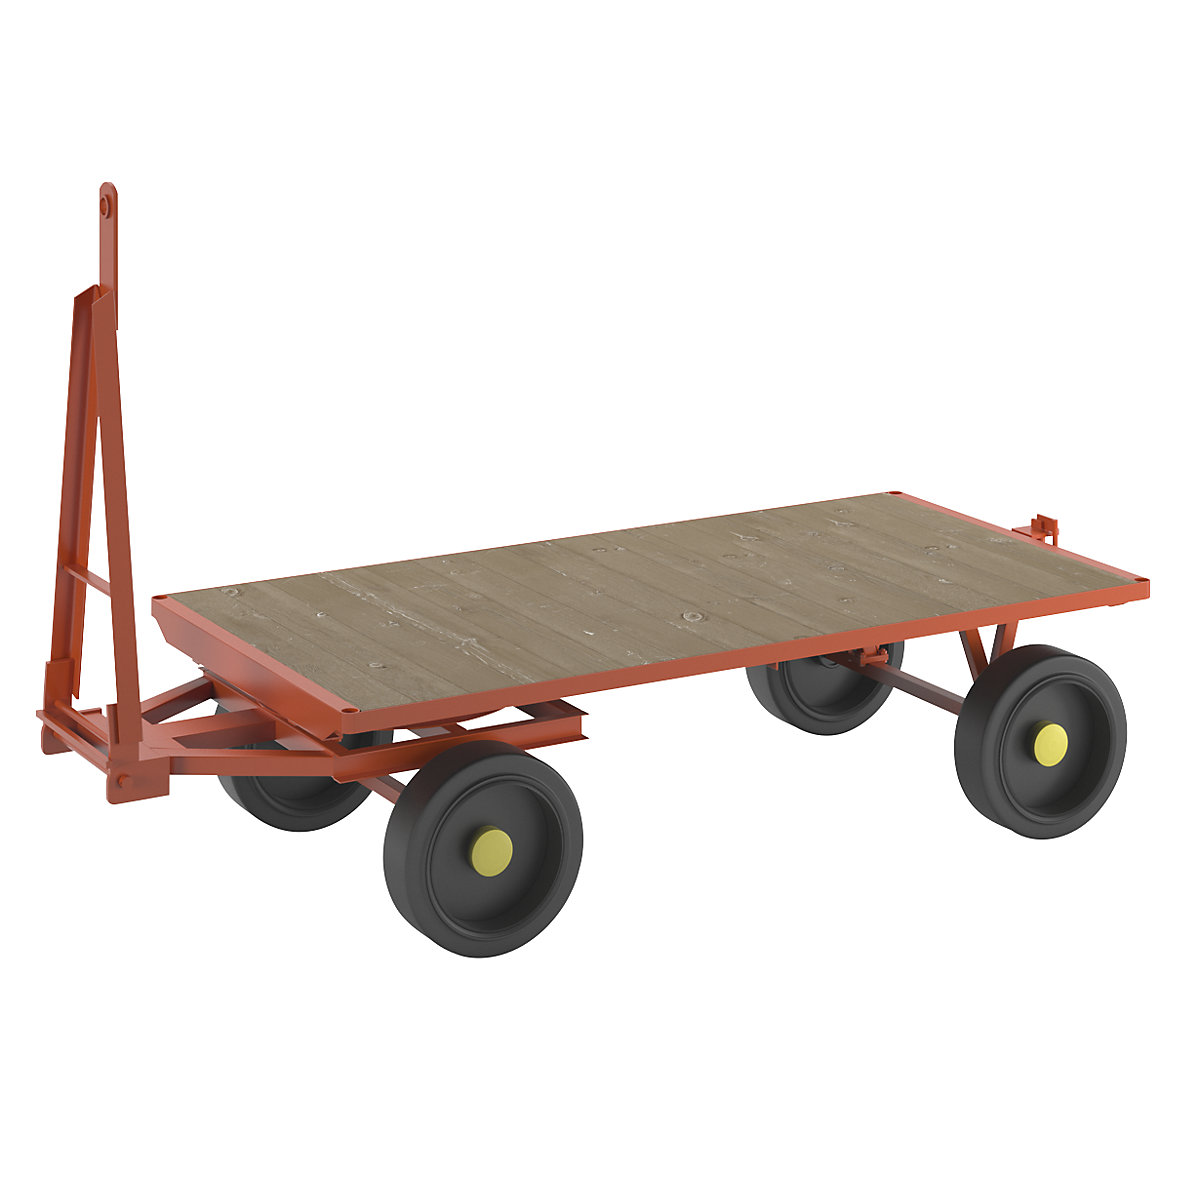 Trailer, 2-wheel turntable steering, max. load 5 t, platform 2.0 x 1.0 m, solid rubber tyres-2